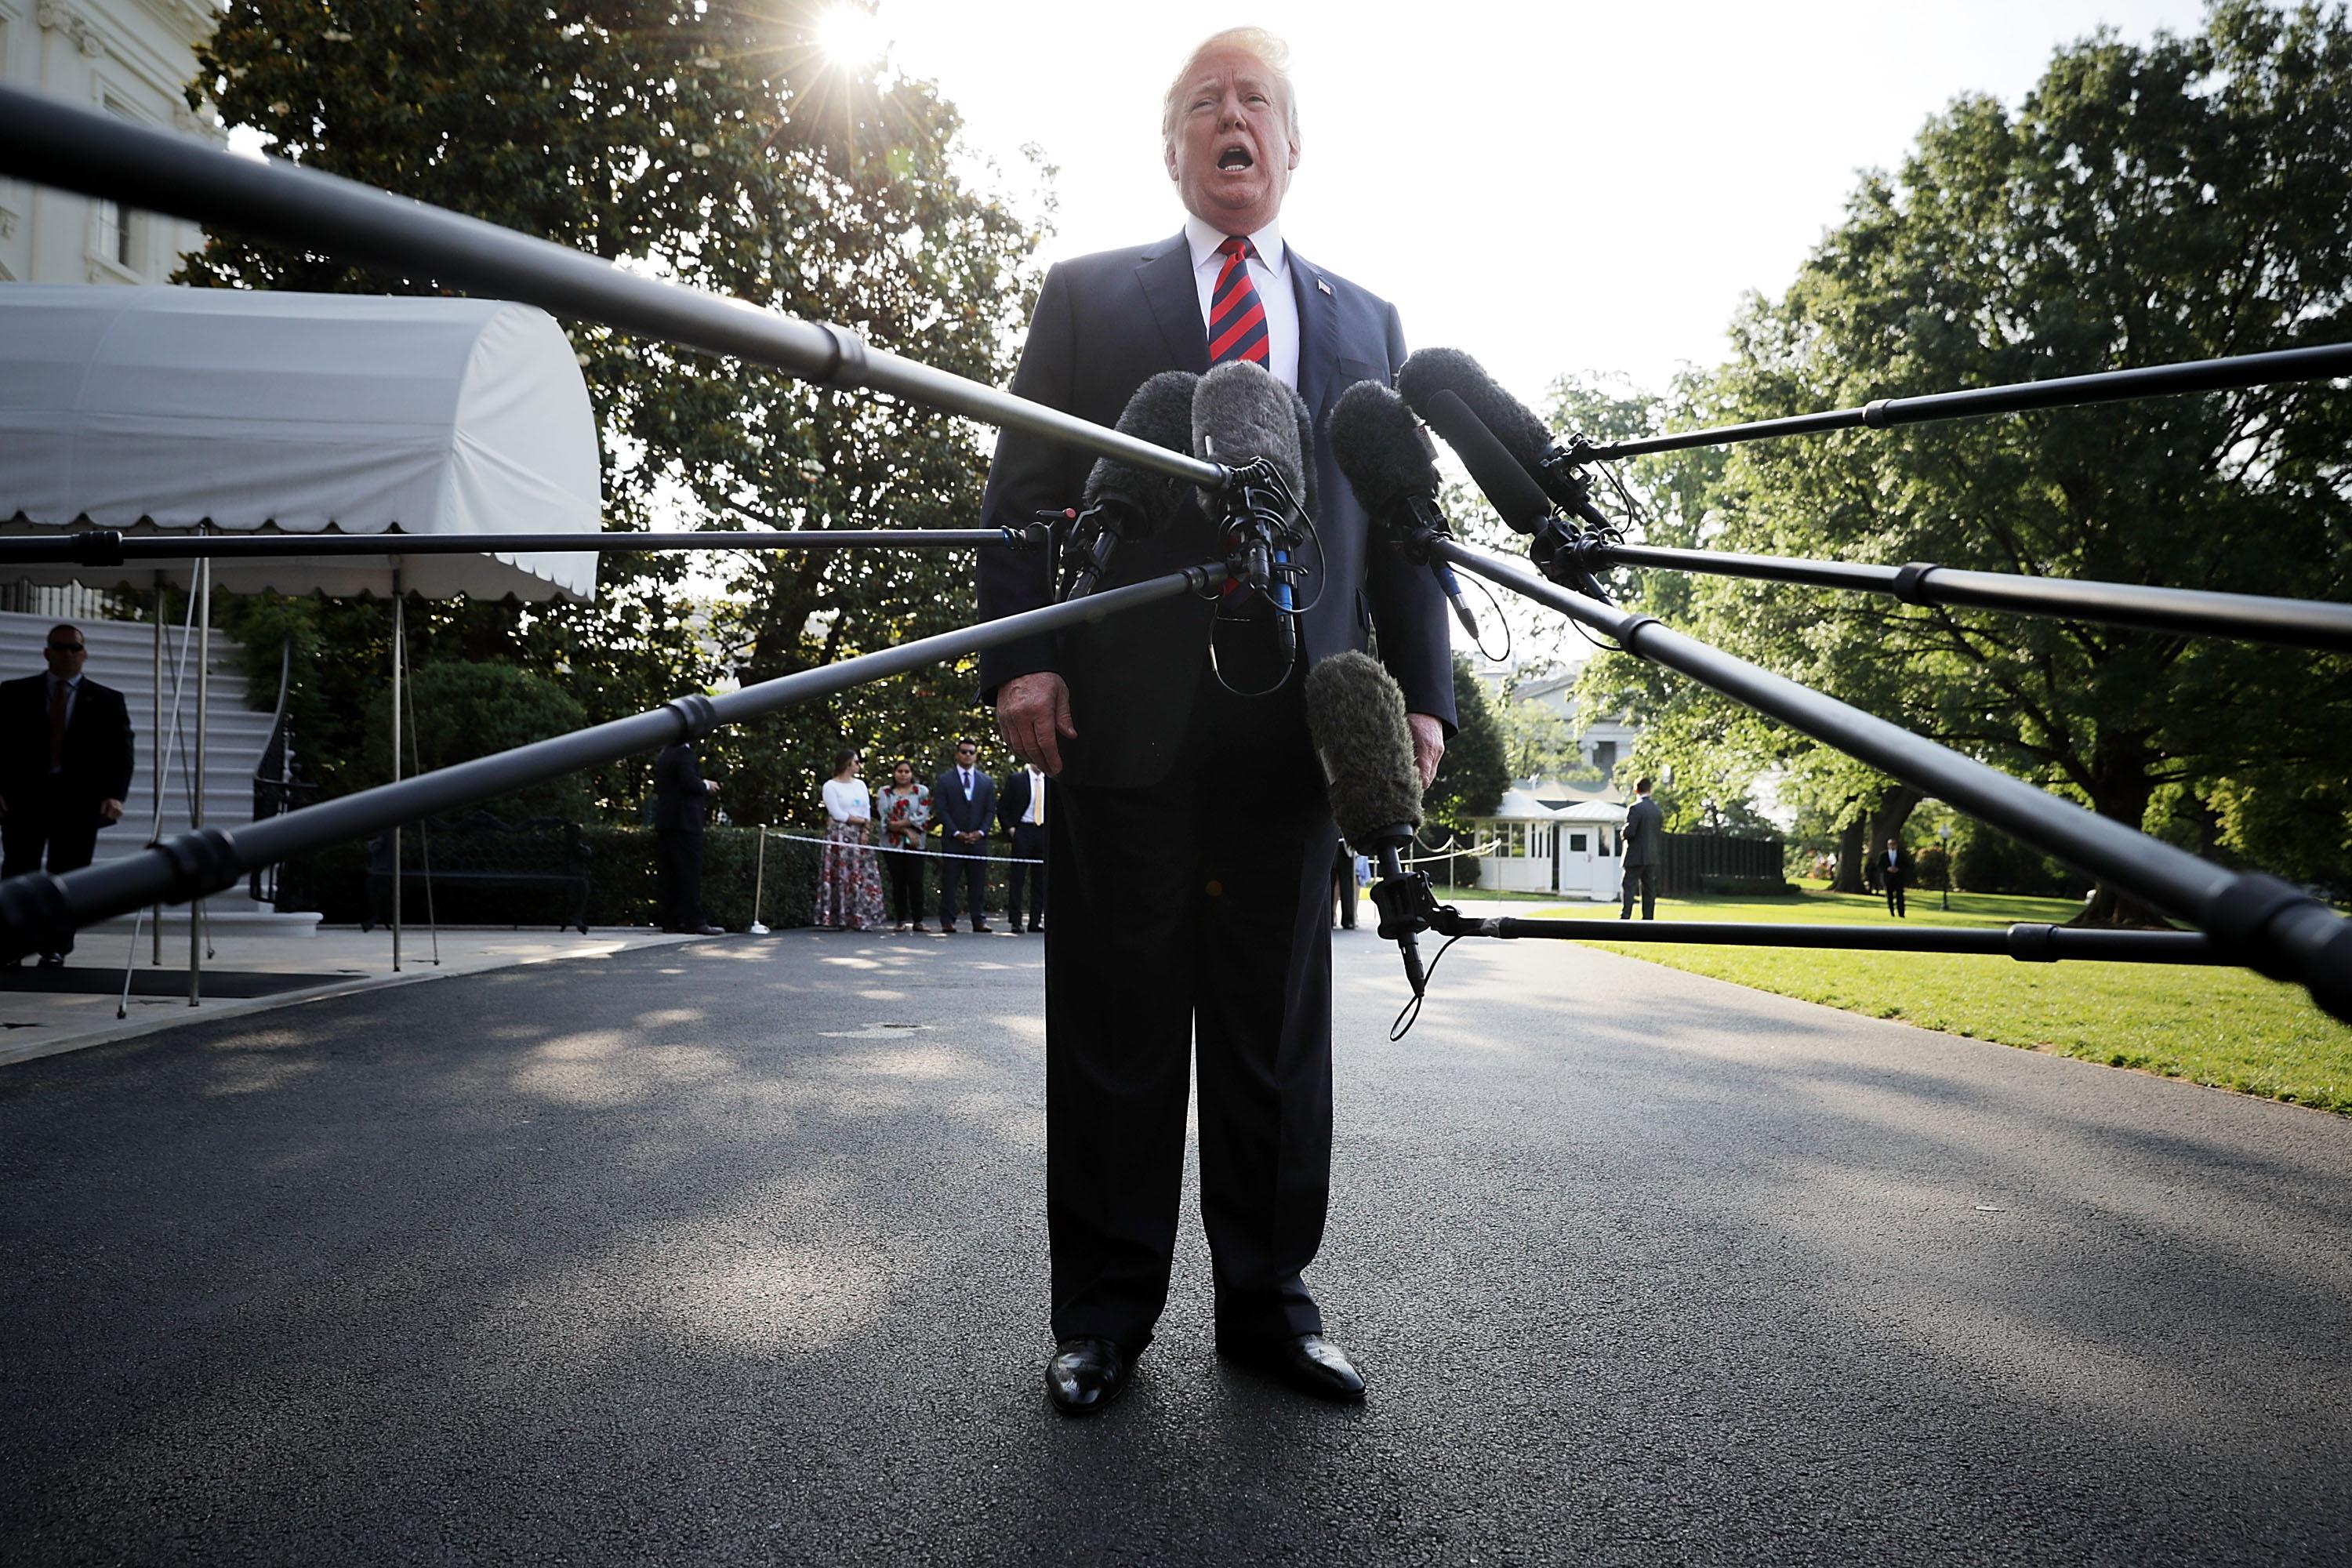 WASHINGTON, DC - JUNE 08:  U.S. President Donald Trump talks to reporters as he departs the White House June 8, 2018 in Washington, DC. Trump is traveling to Canada to attend the G7 summit before heading to Singapore on Saturday for a planned U.S.-North Korea summit.  (Photo by Chip Somodevilla/Getty Images)